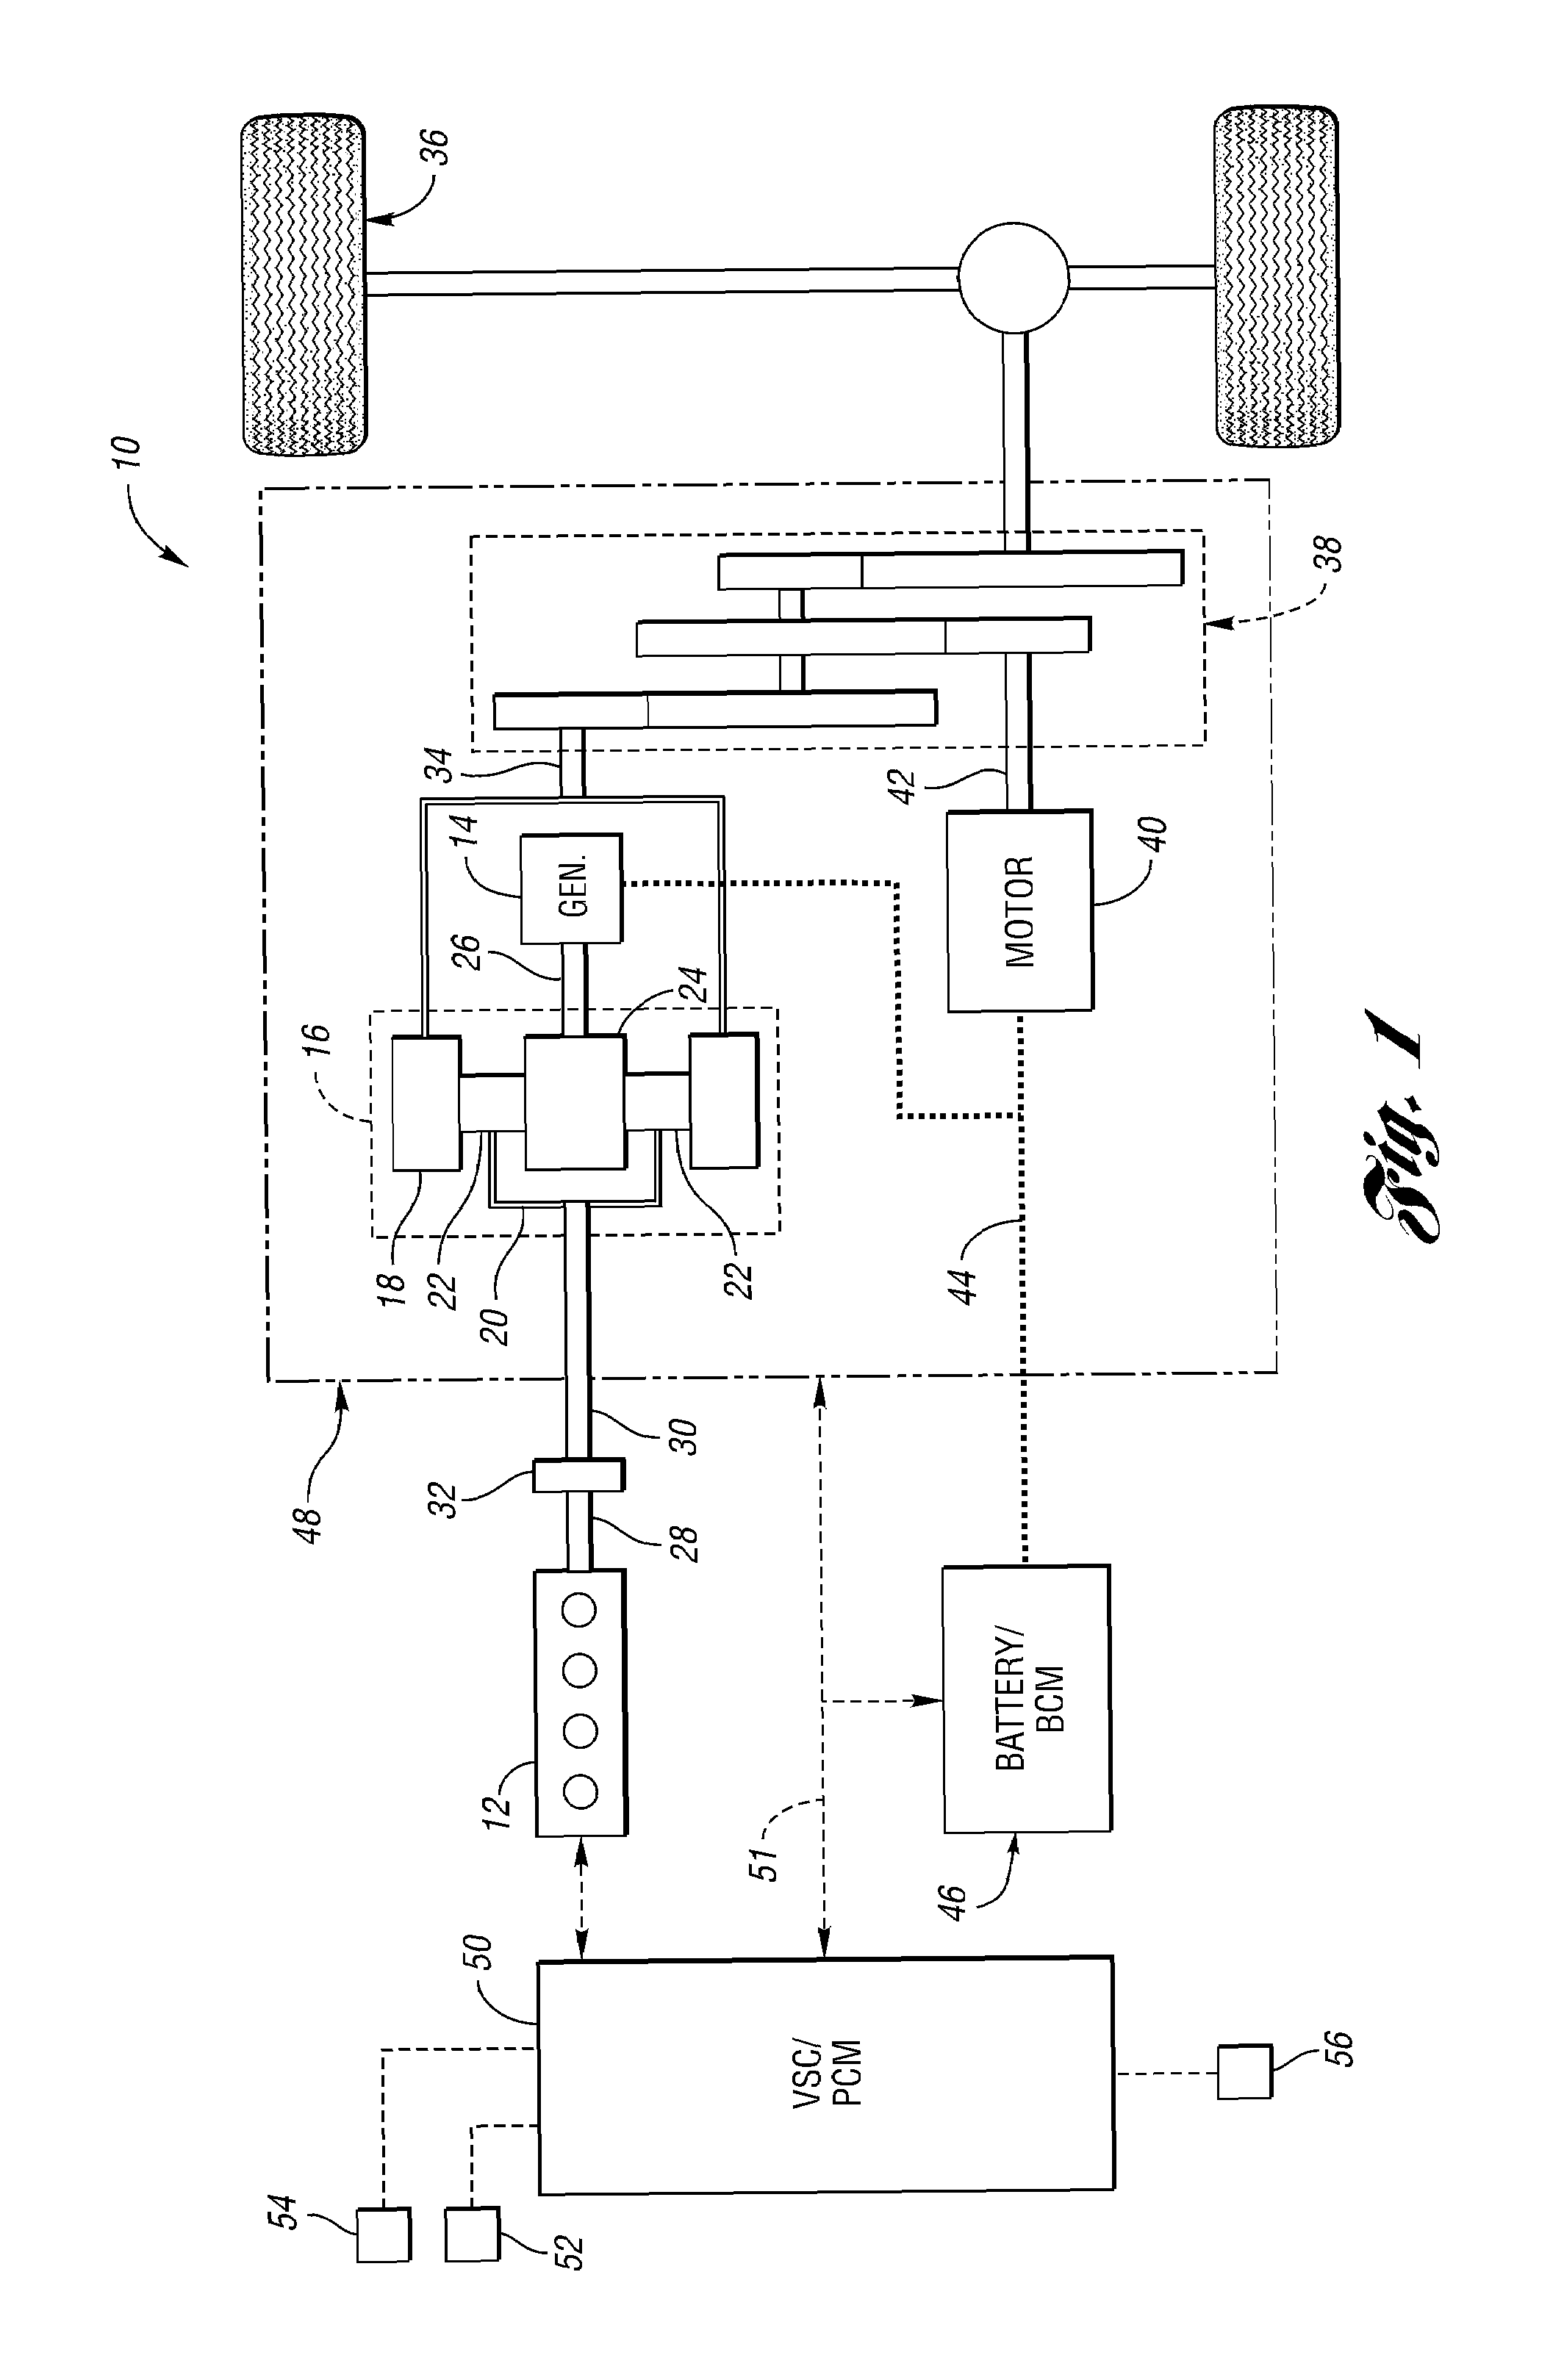 System and method for controlling speed of an engine